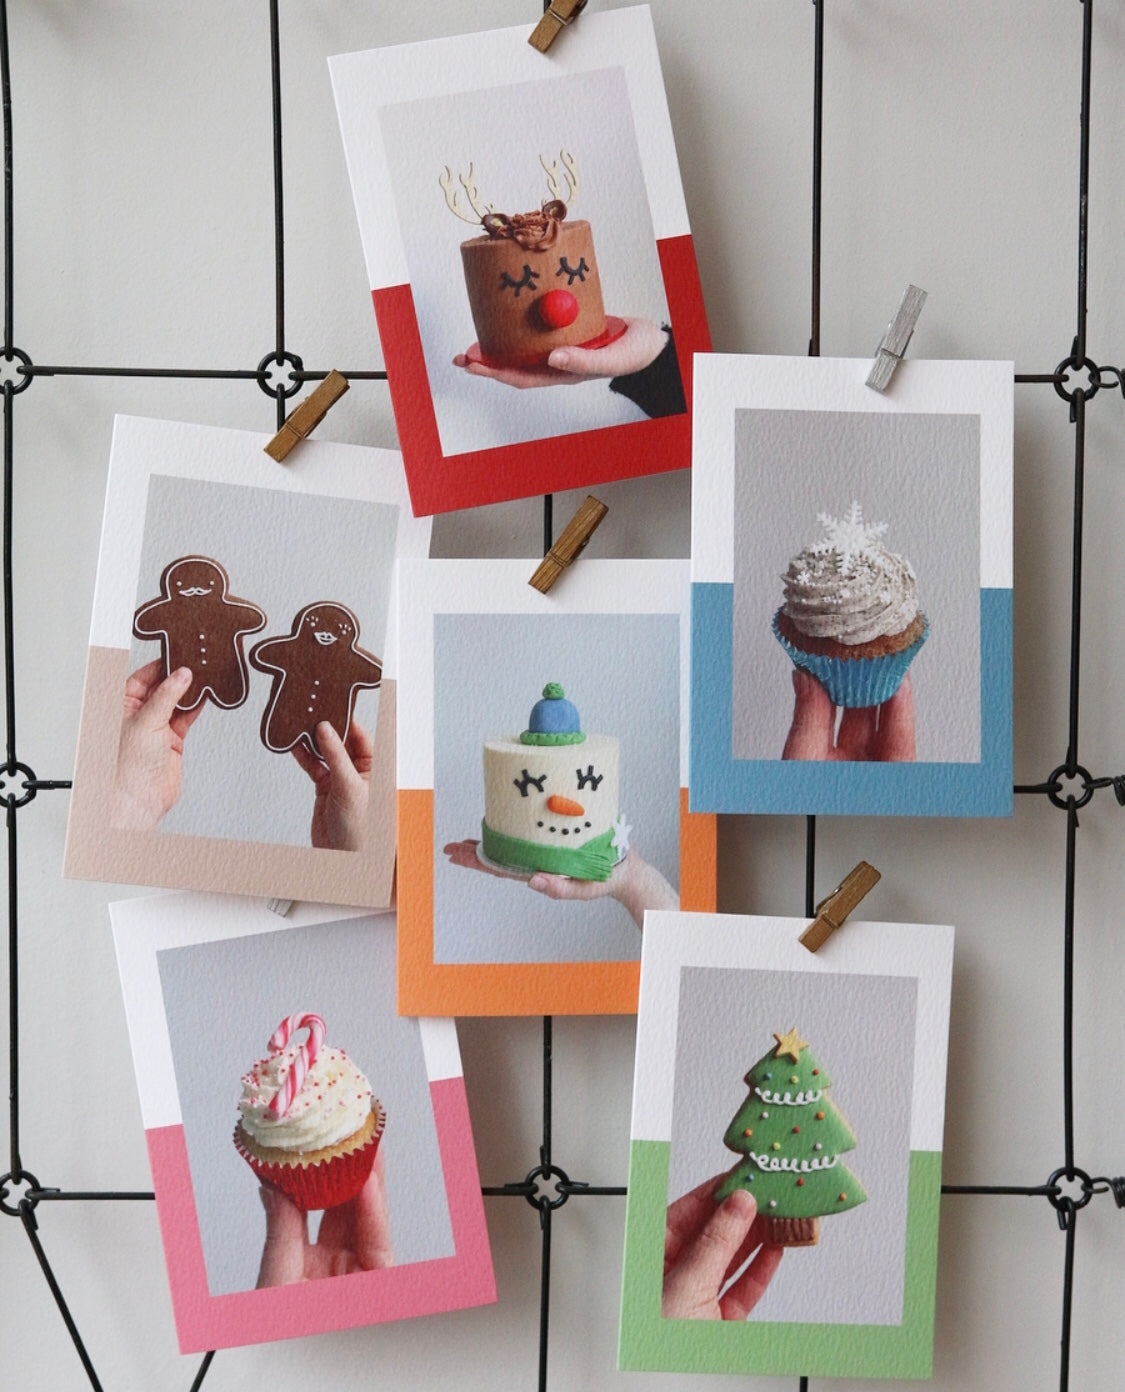 Selection of Christmas Cards with Photos of Cakes, Cupcakes and Biscuits Hanging on Wall